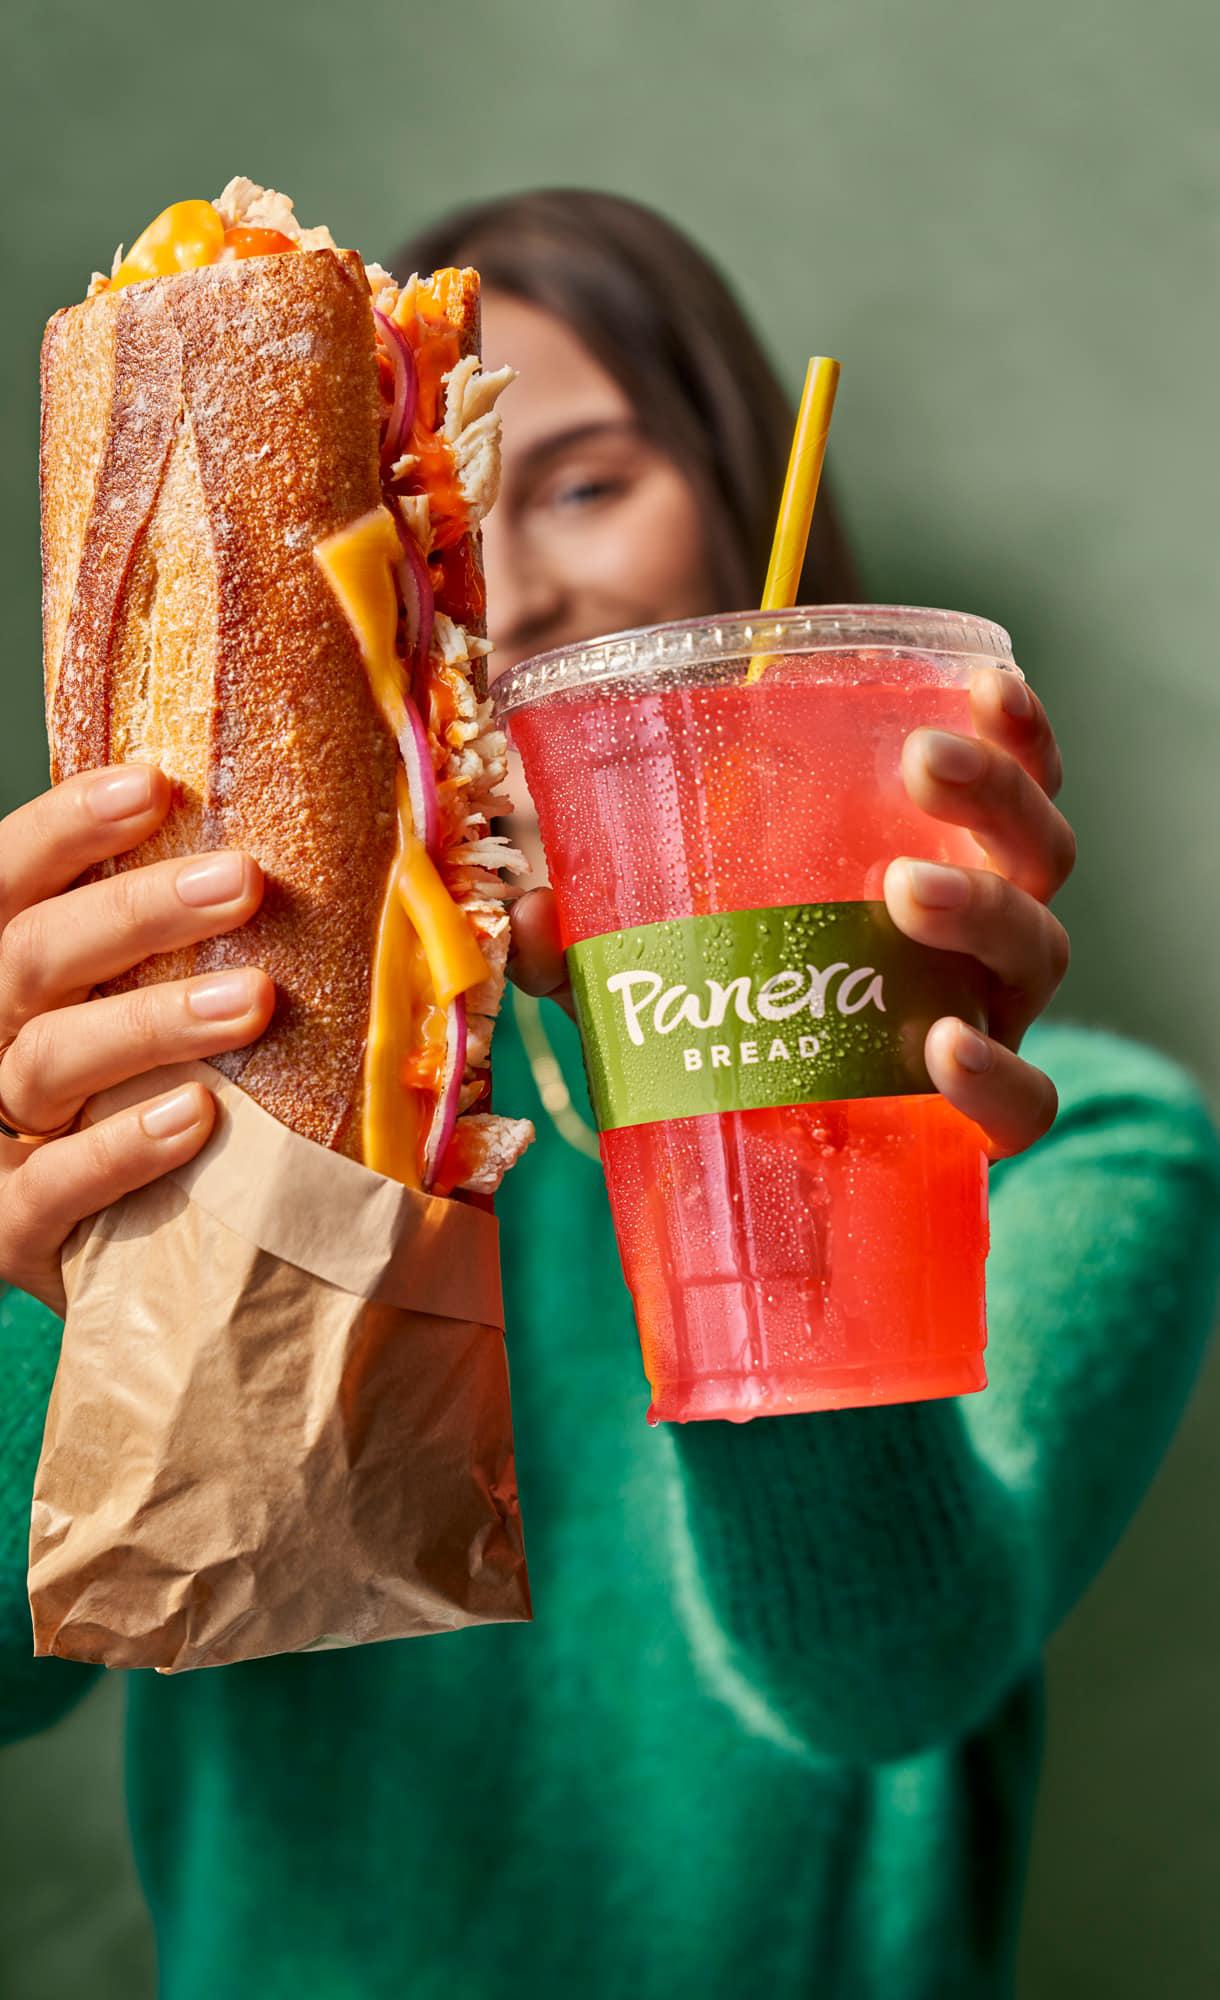 Smoky Buffalo Chicken Toasted Baguette and Strawberry Lemon Mint Charged Lemonade Panera Bread Belleville (613)967-7758